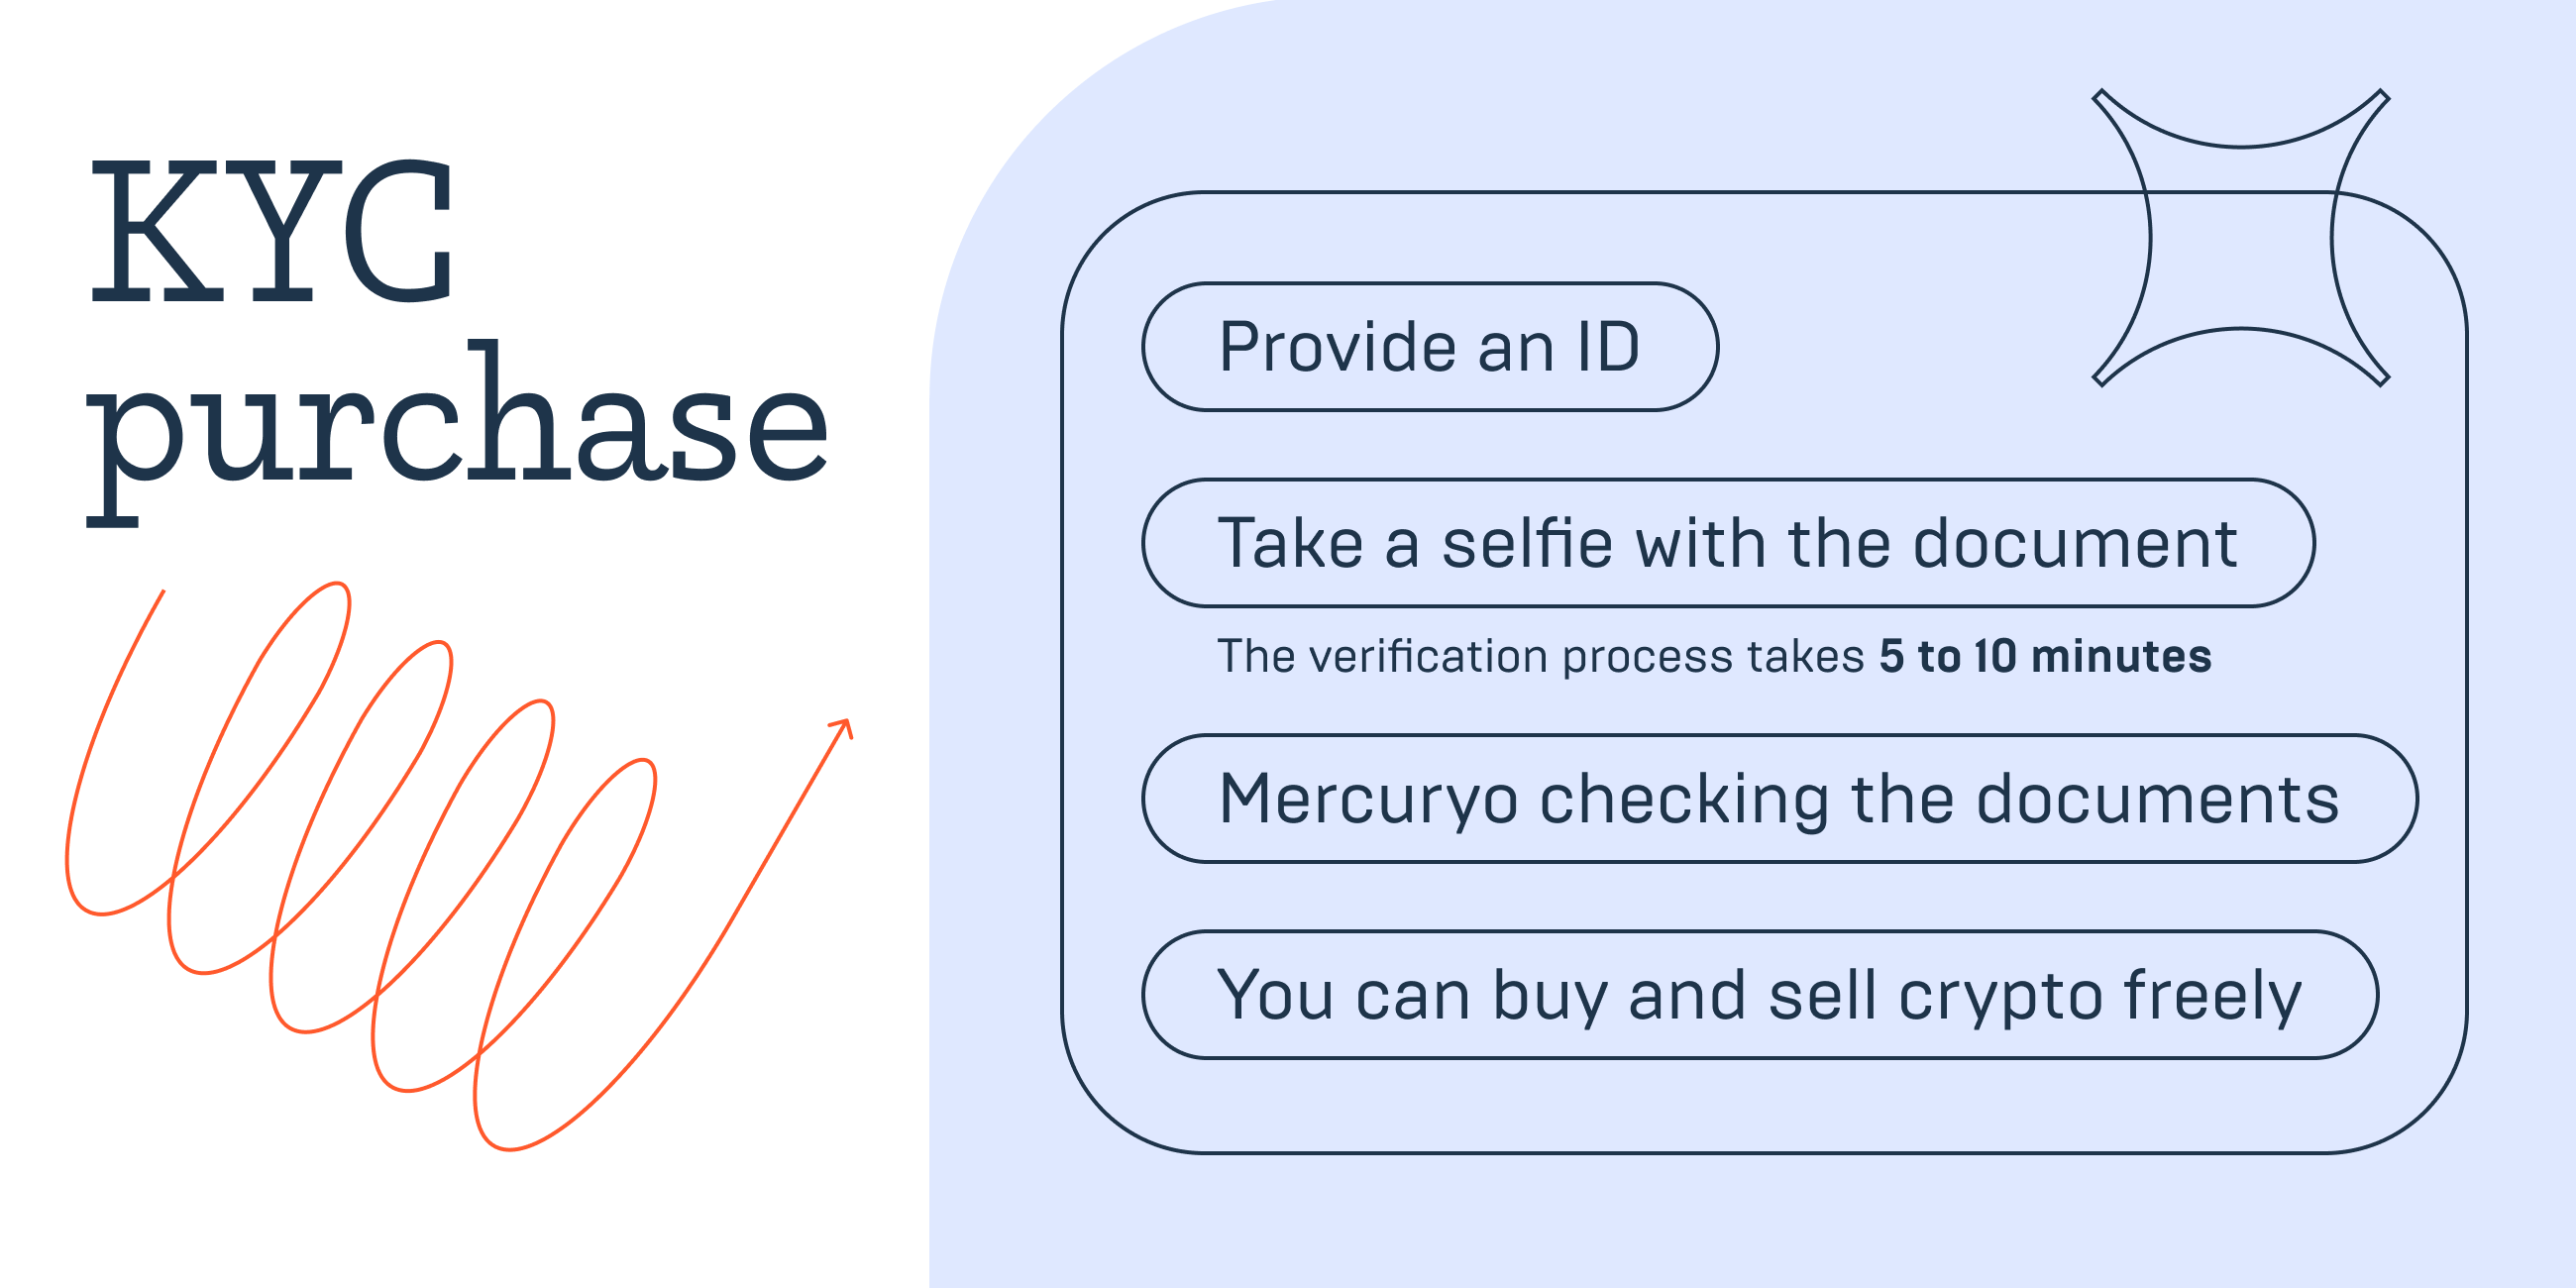 How to Buy Bitcoin With Debit Card [No Verification]